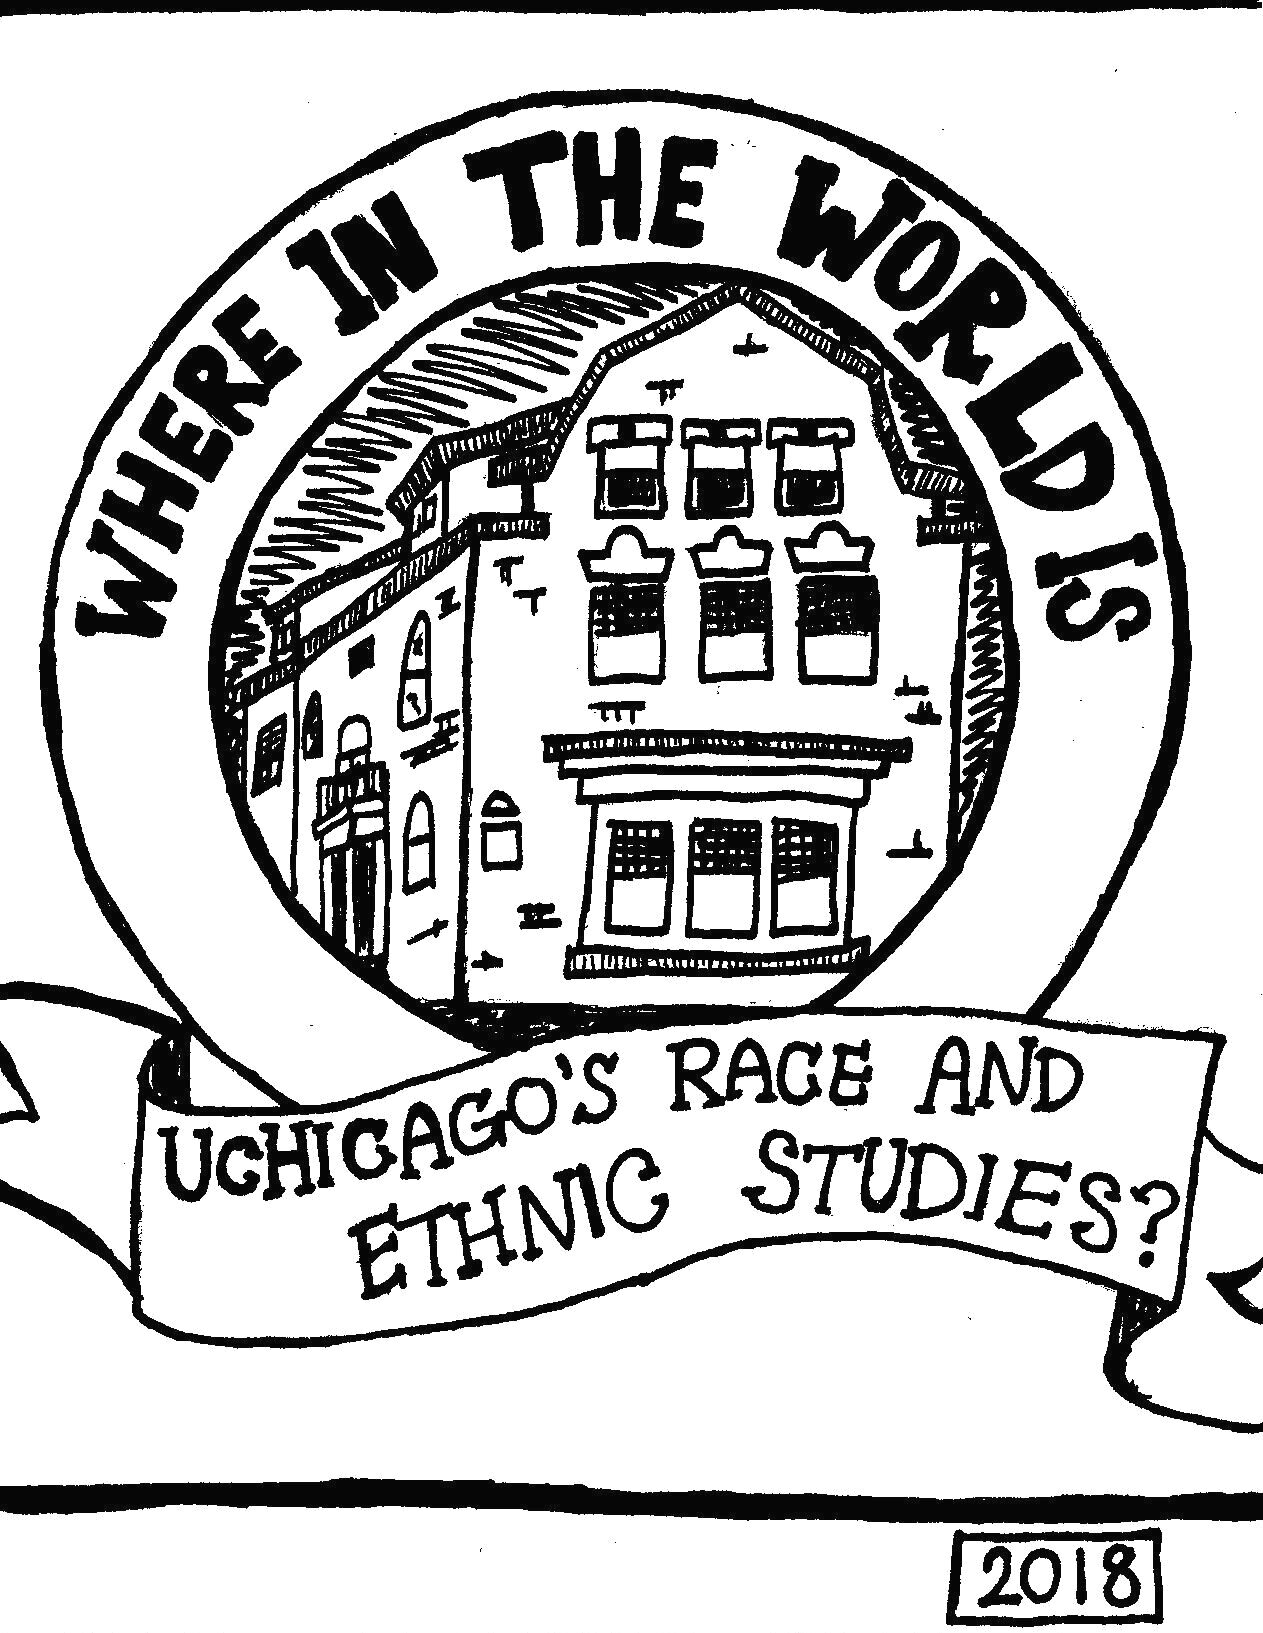  Where In The World Is UChicago's Race and Ethnic Studies? 